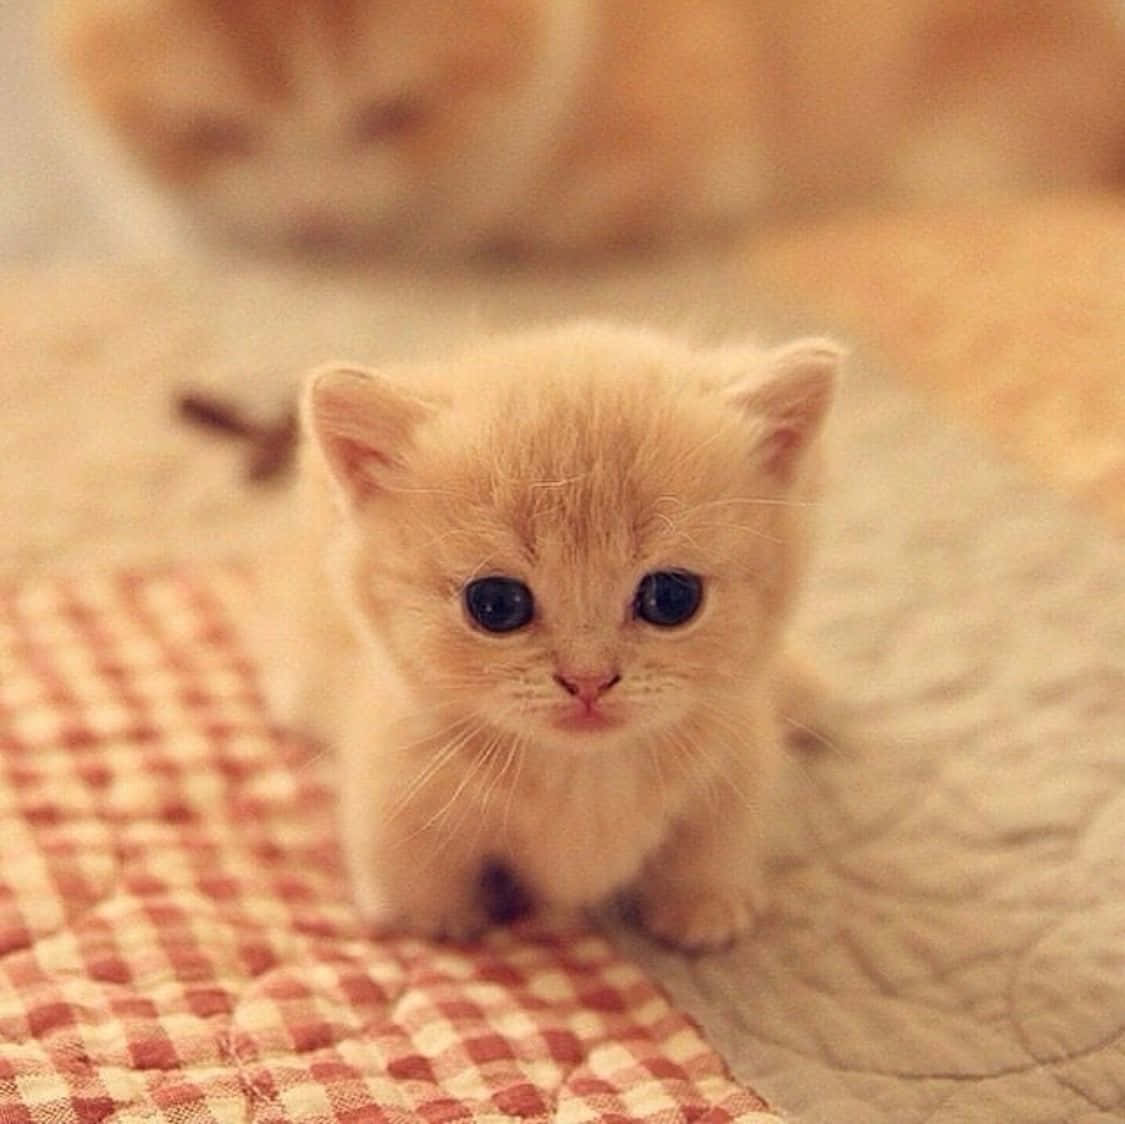 "The Cutest Baby Cat"